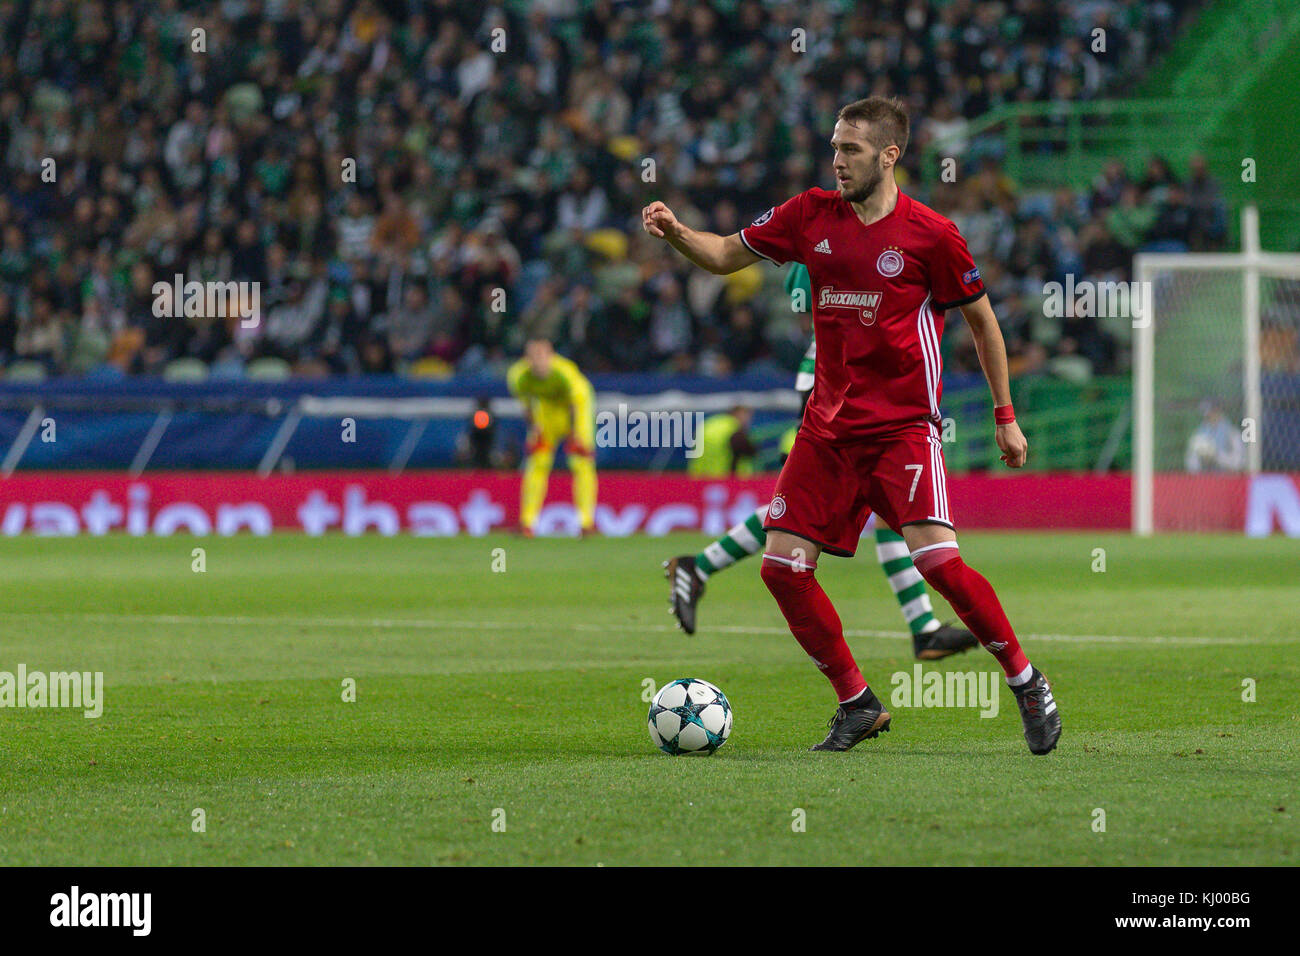 Lisbon, Portugal. 22nd Nov, 2017. November 22, 2017. Lisbon, Portugal.  Olympiakos's midfielder from Greece Kostas Fortounis (7) during the game of  the 5th round of the UEFA Champions League Group D, Sporting